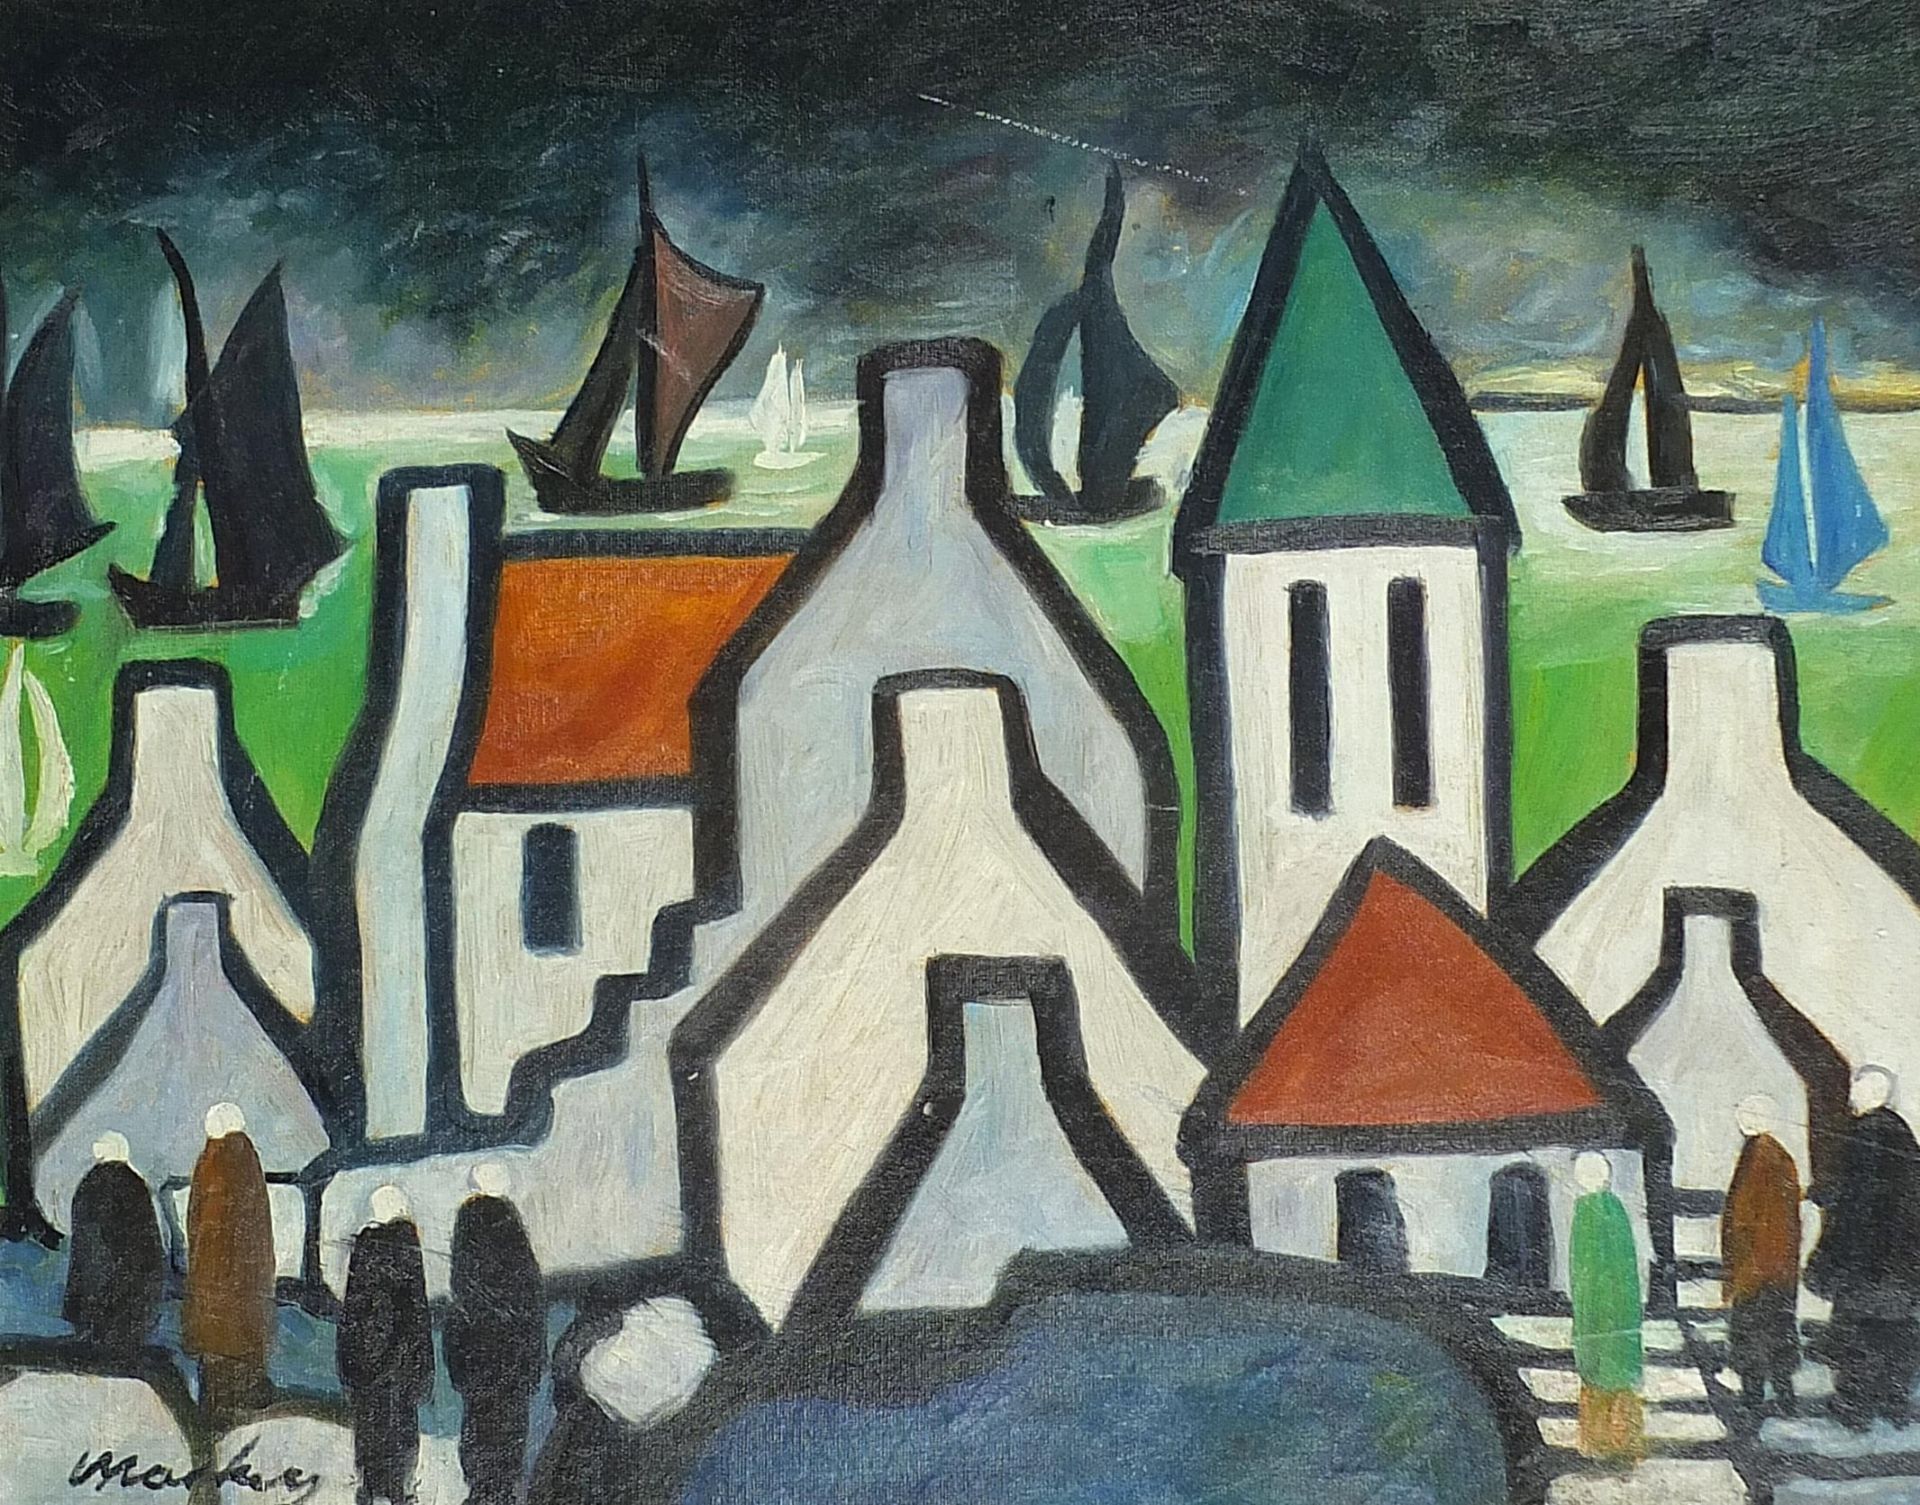 Manner of Markey Robinson - Cottages before water and boats, Irish school oil on board, mounted